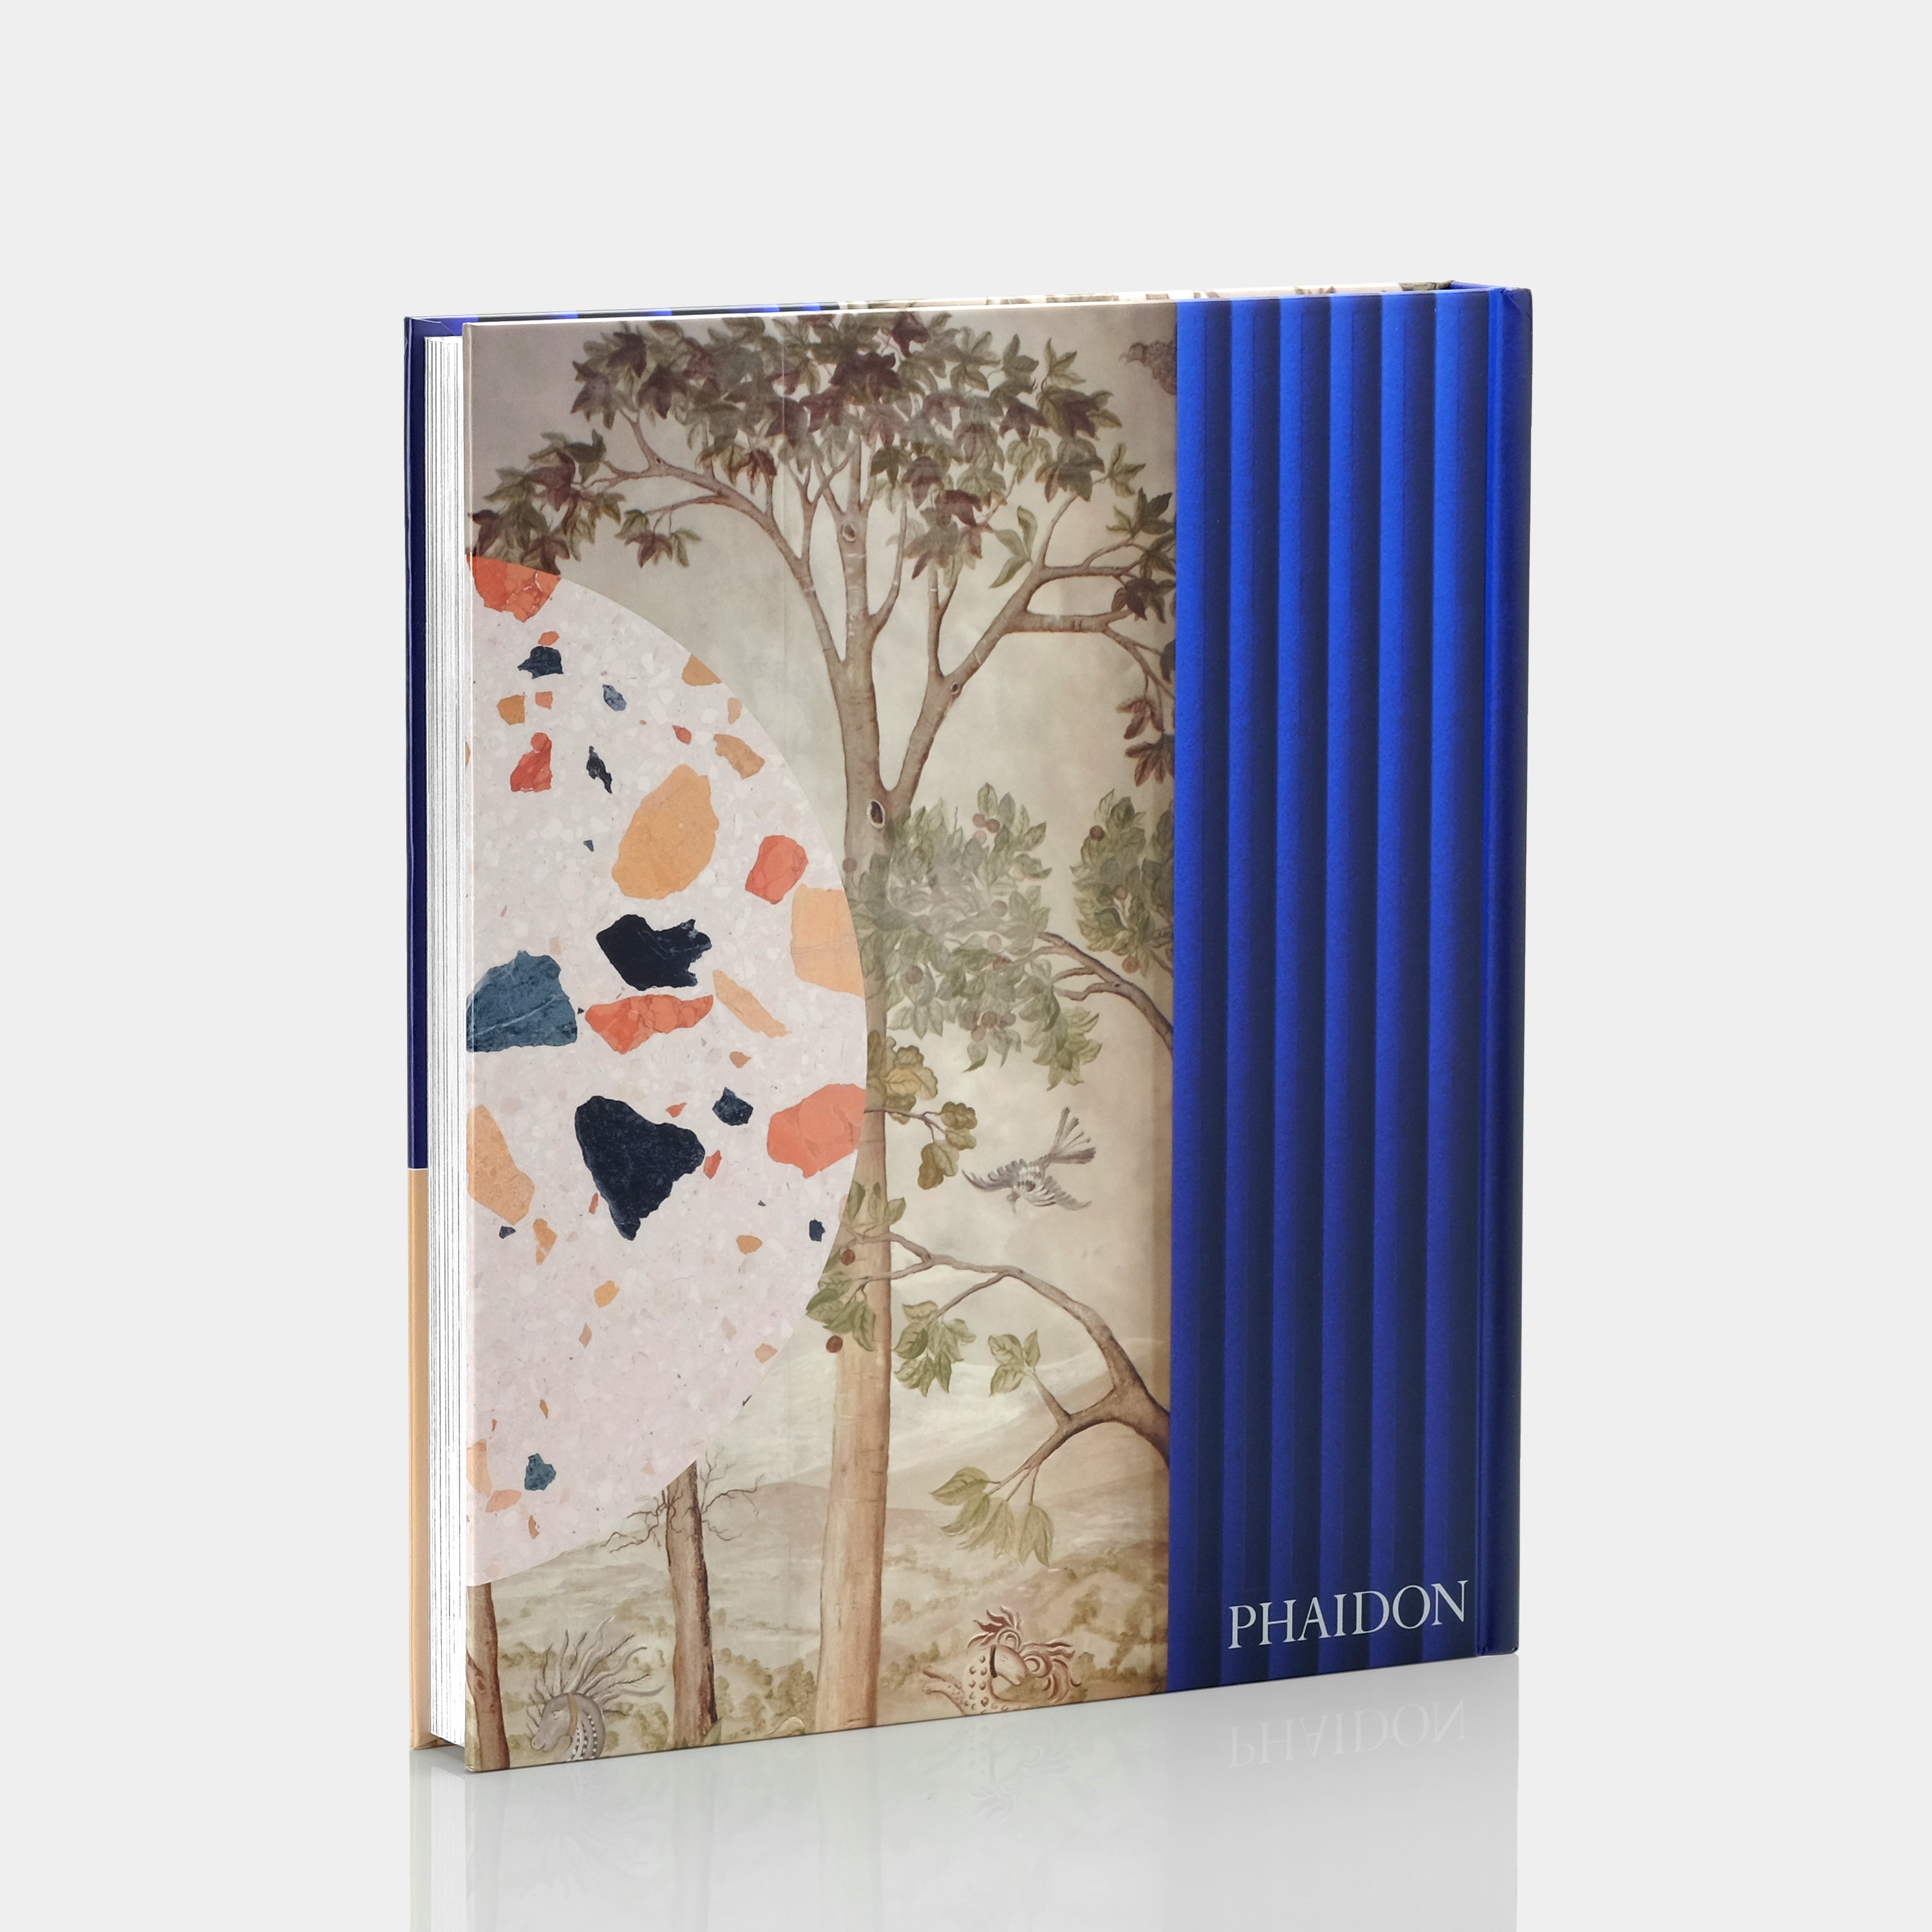 By Design: The World's Best Contemporary Interior Designers Phaidon Book